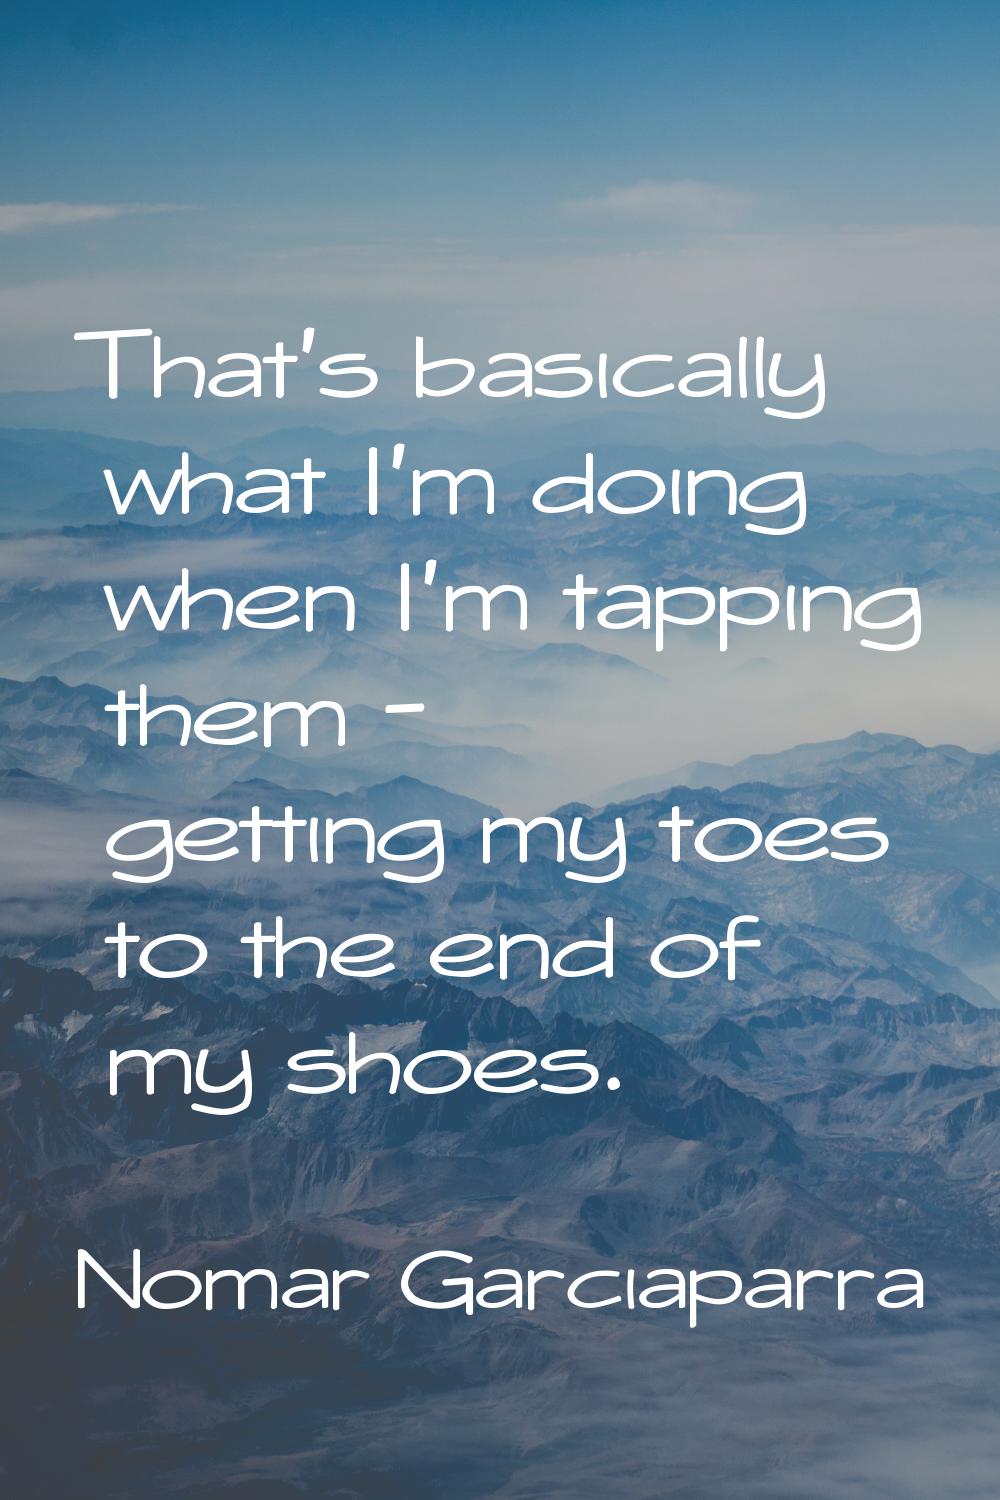 That's basically what I'm doing when I'm tapping them - getting my toes to the end of my shoes.